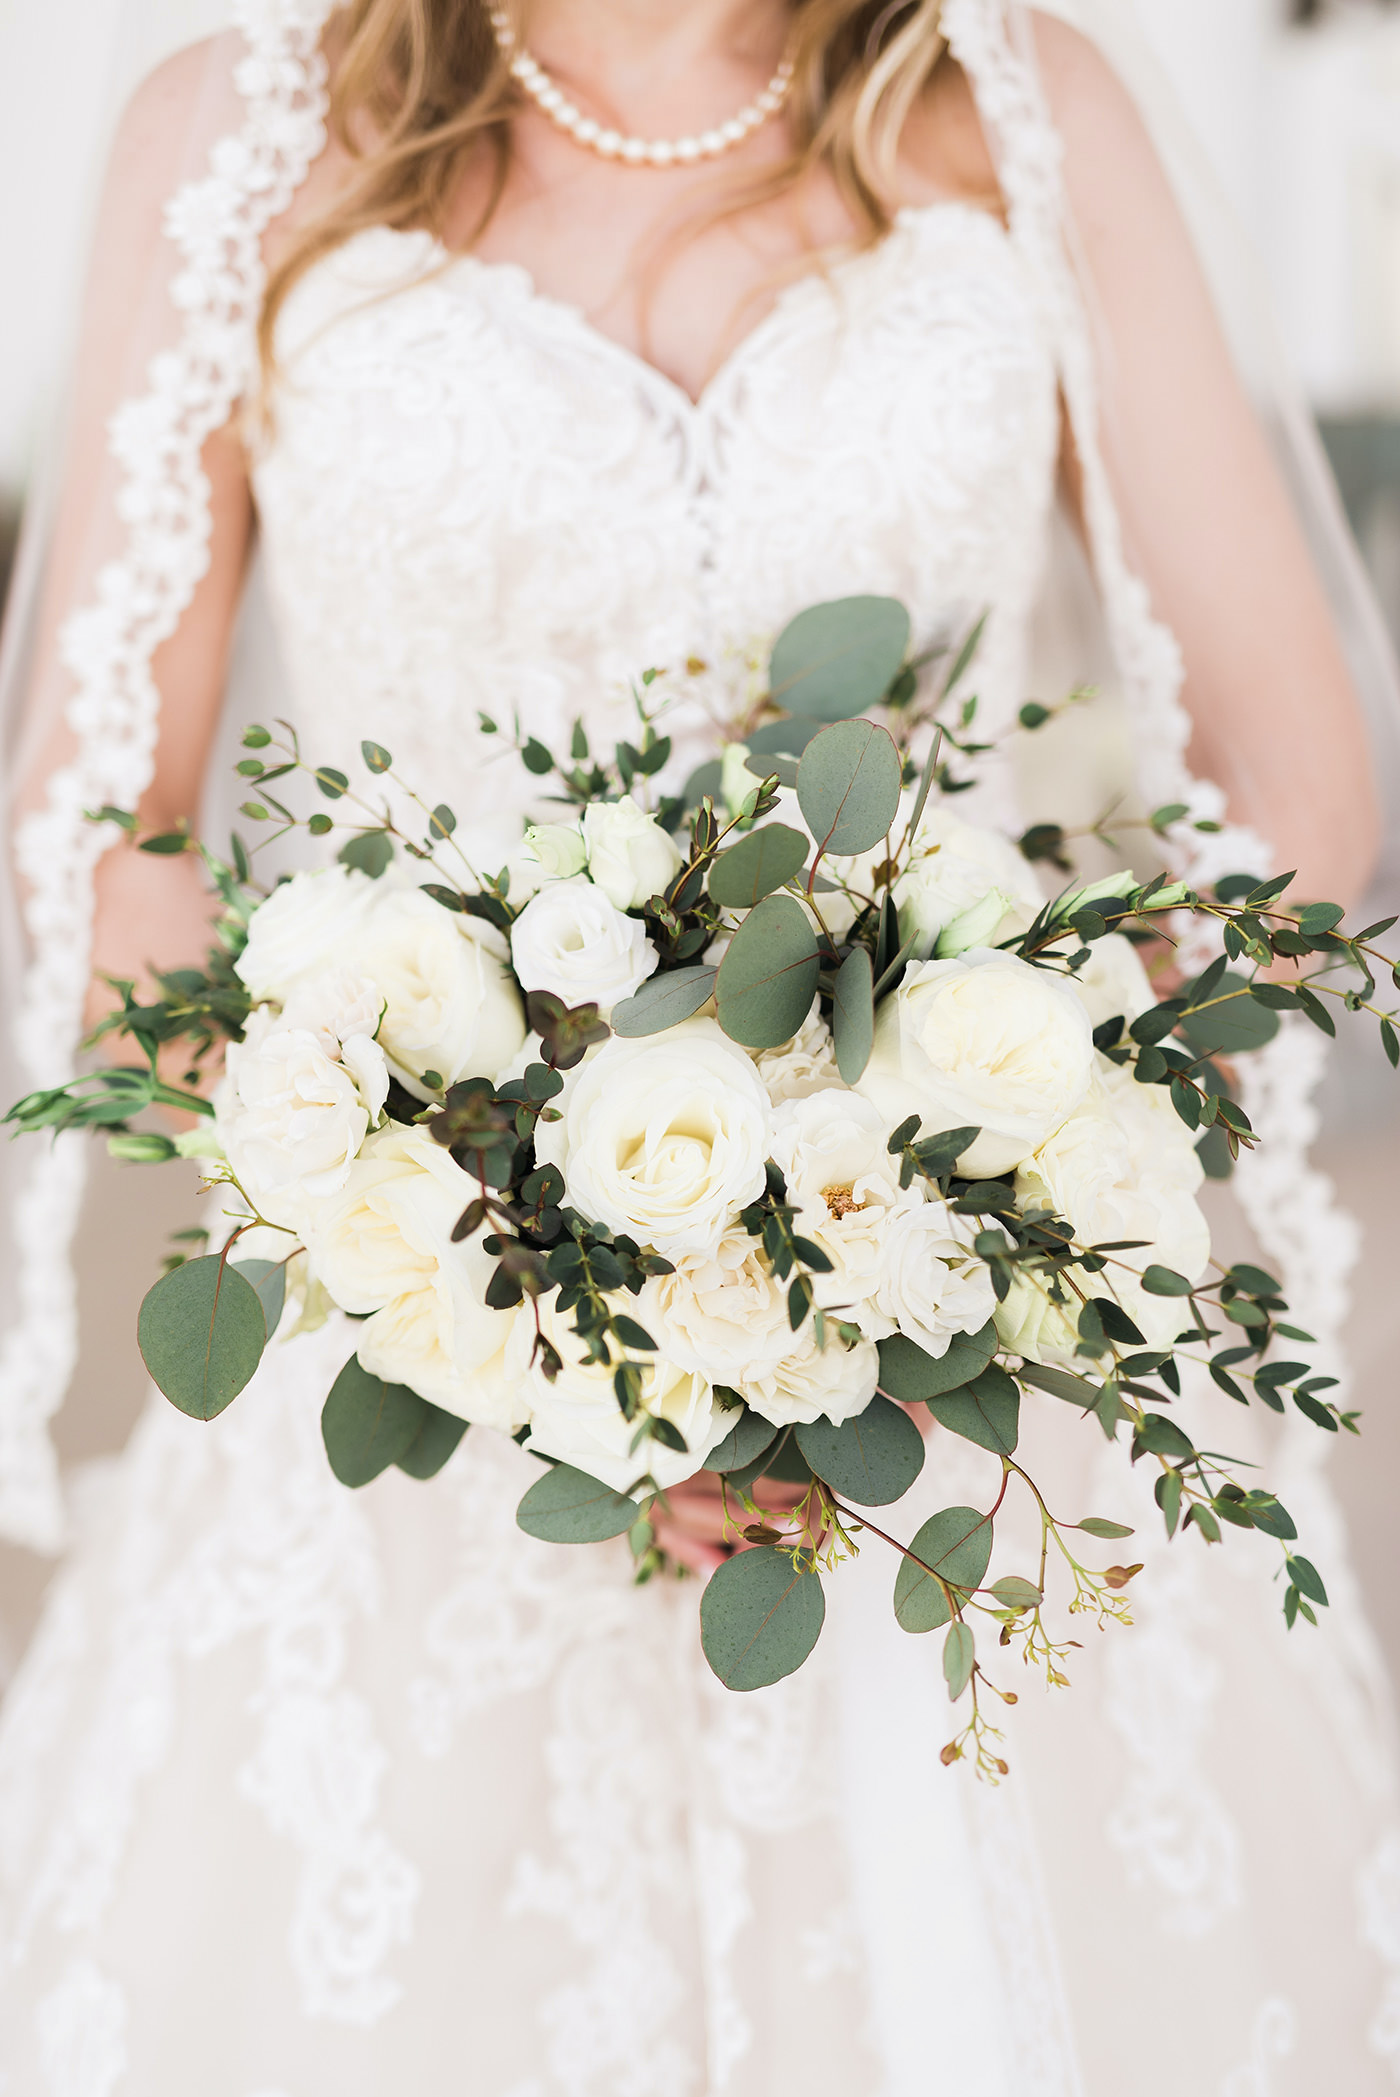 Romantic Florida Bride Holding Round Ivory Rose Wedding Bouquet with Greenery, Bride Wearing Morilee Wedding Dress and Pearl Necklace | Tampa Bay Luxury Wedding Planner and Floral Designer John Campbell Weddings